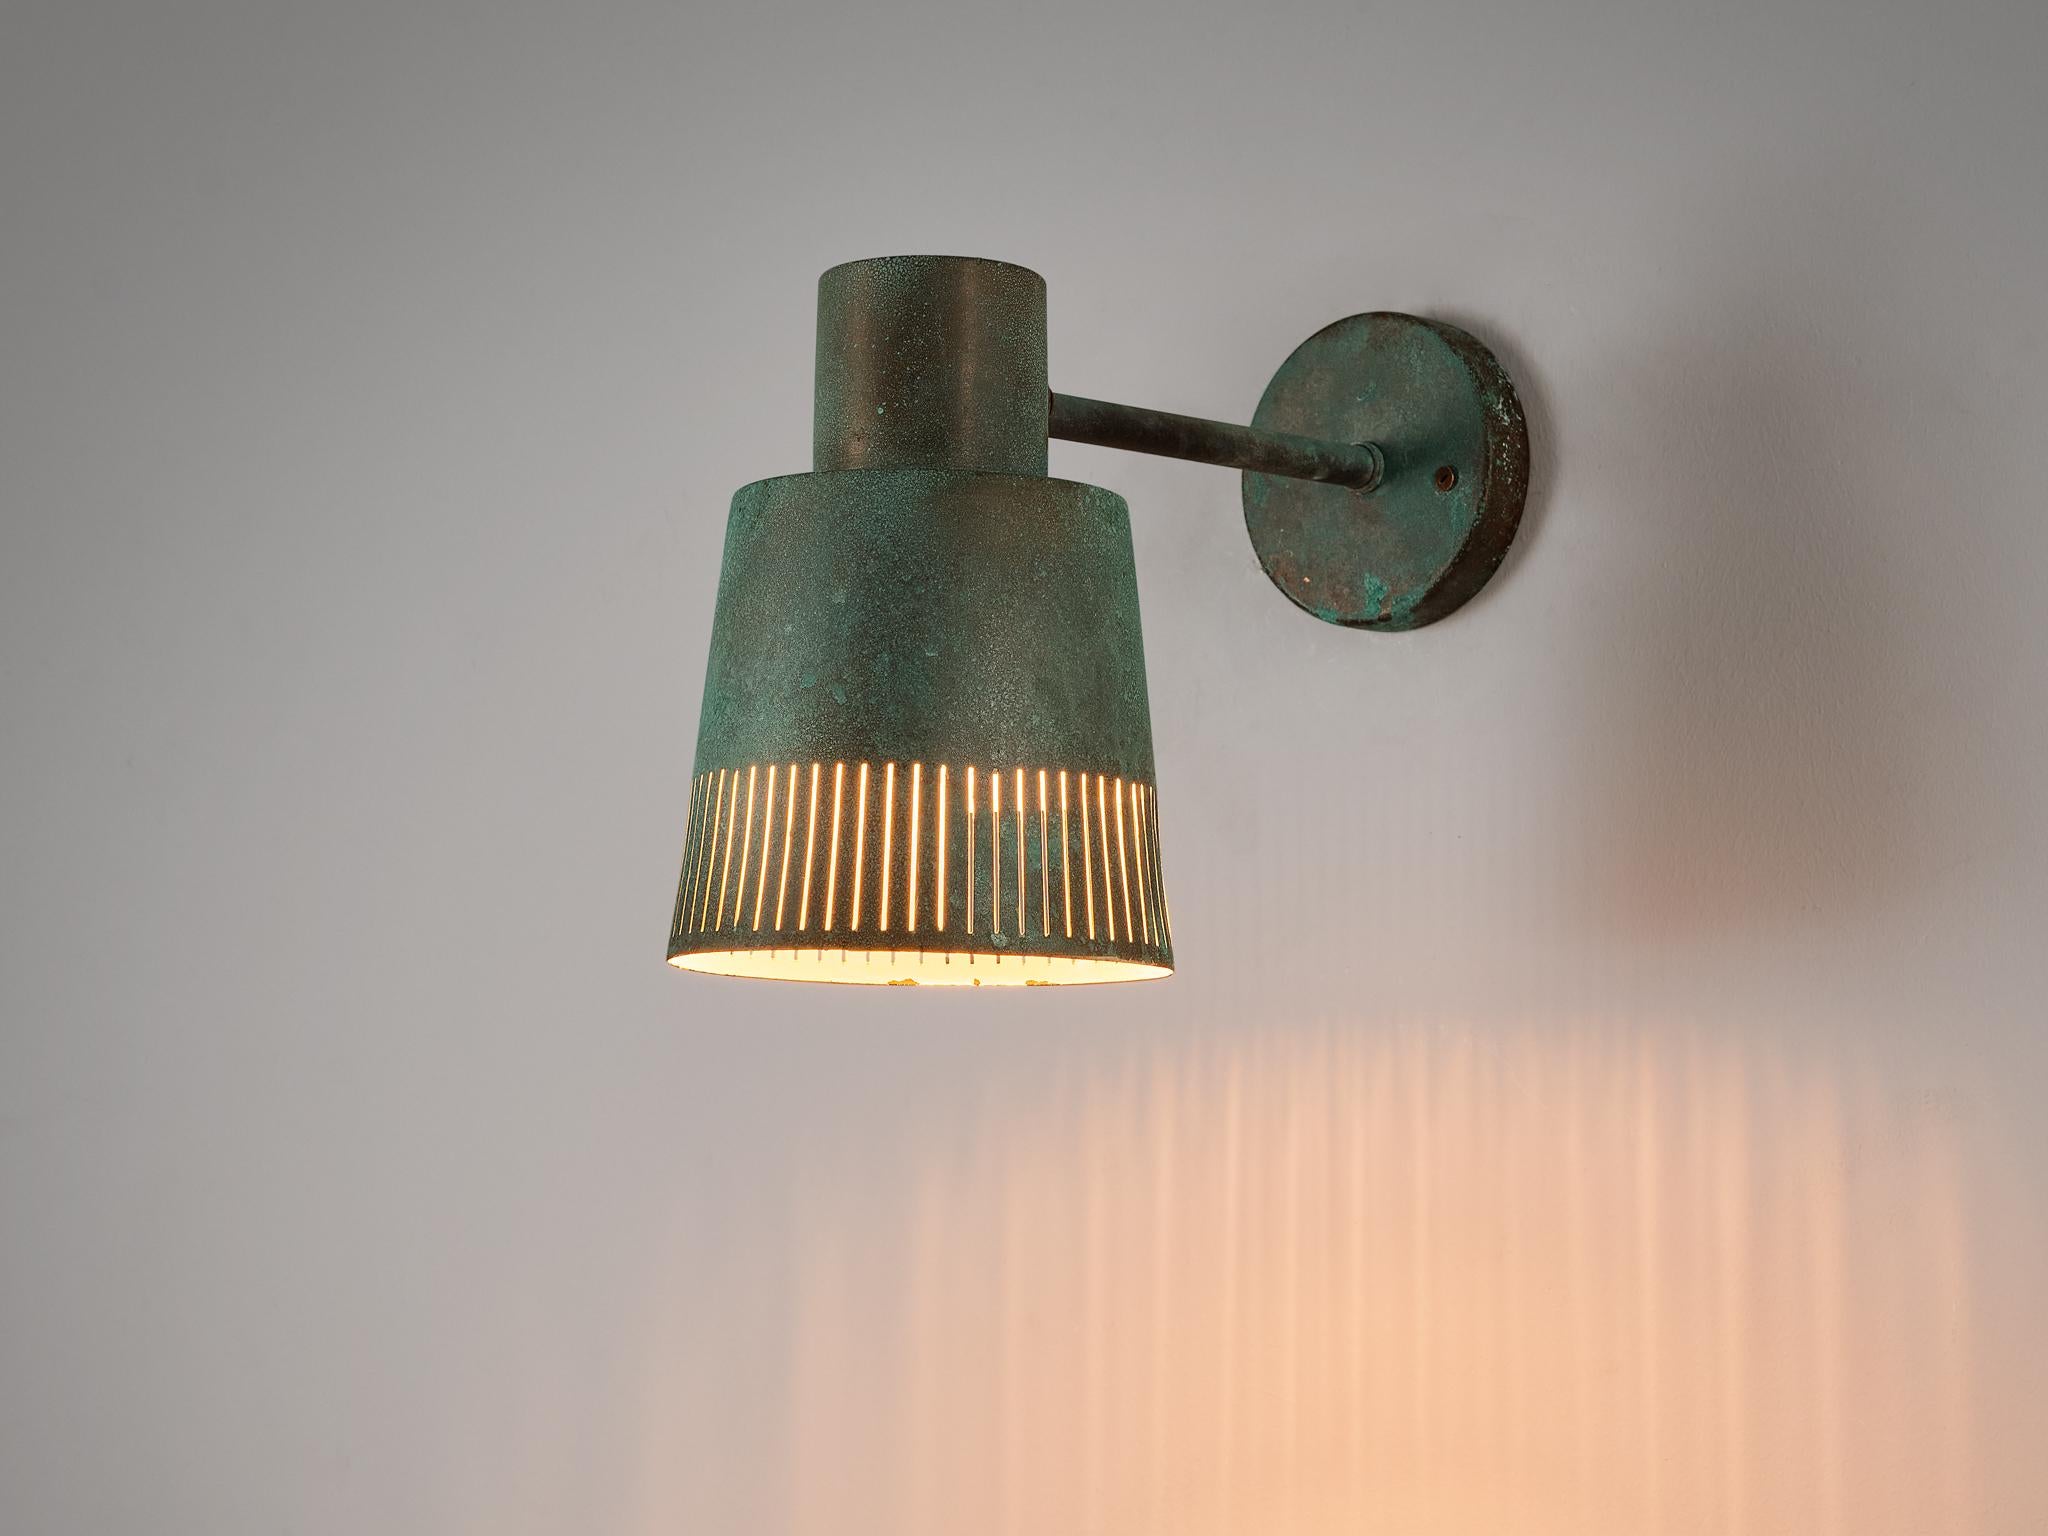 Hans Bergström for Ateljé Lyktan, wall lamp, copper, Sweden, 1940s

A highly well-executed wall light of the 1940s. Bergström used copper for this specific design that obtained admirable green patina over time. The shade of the wall lamp is